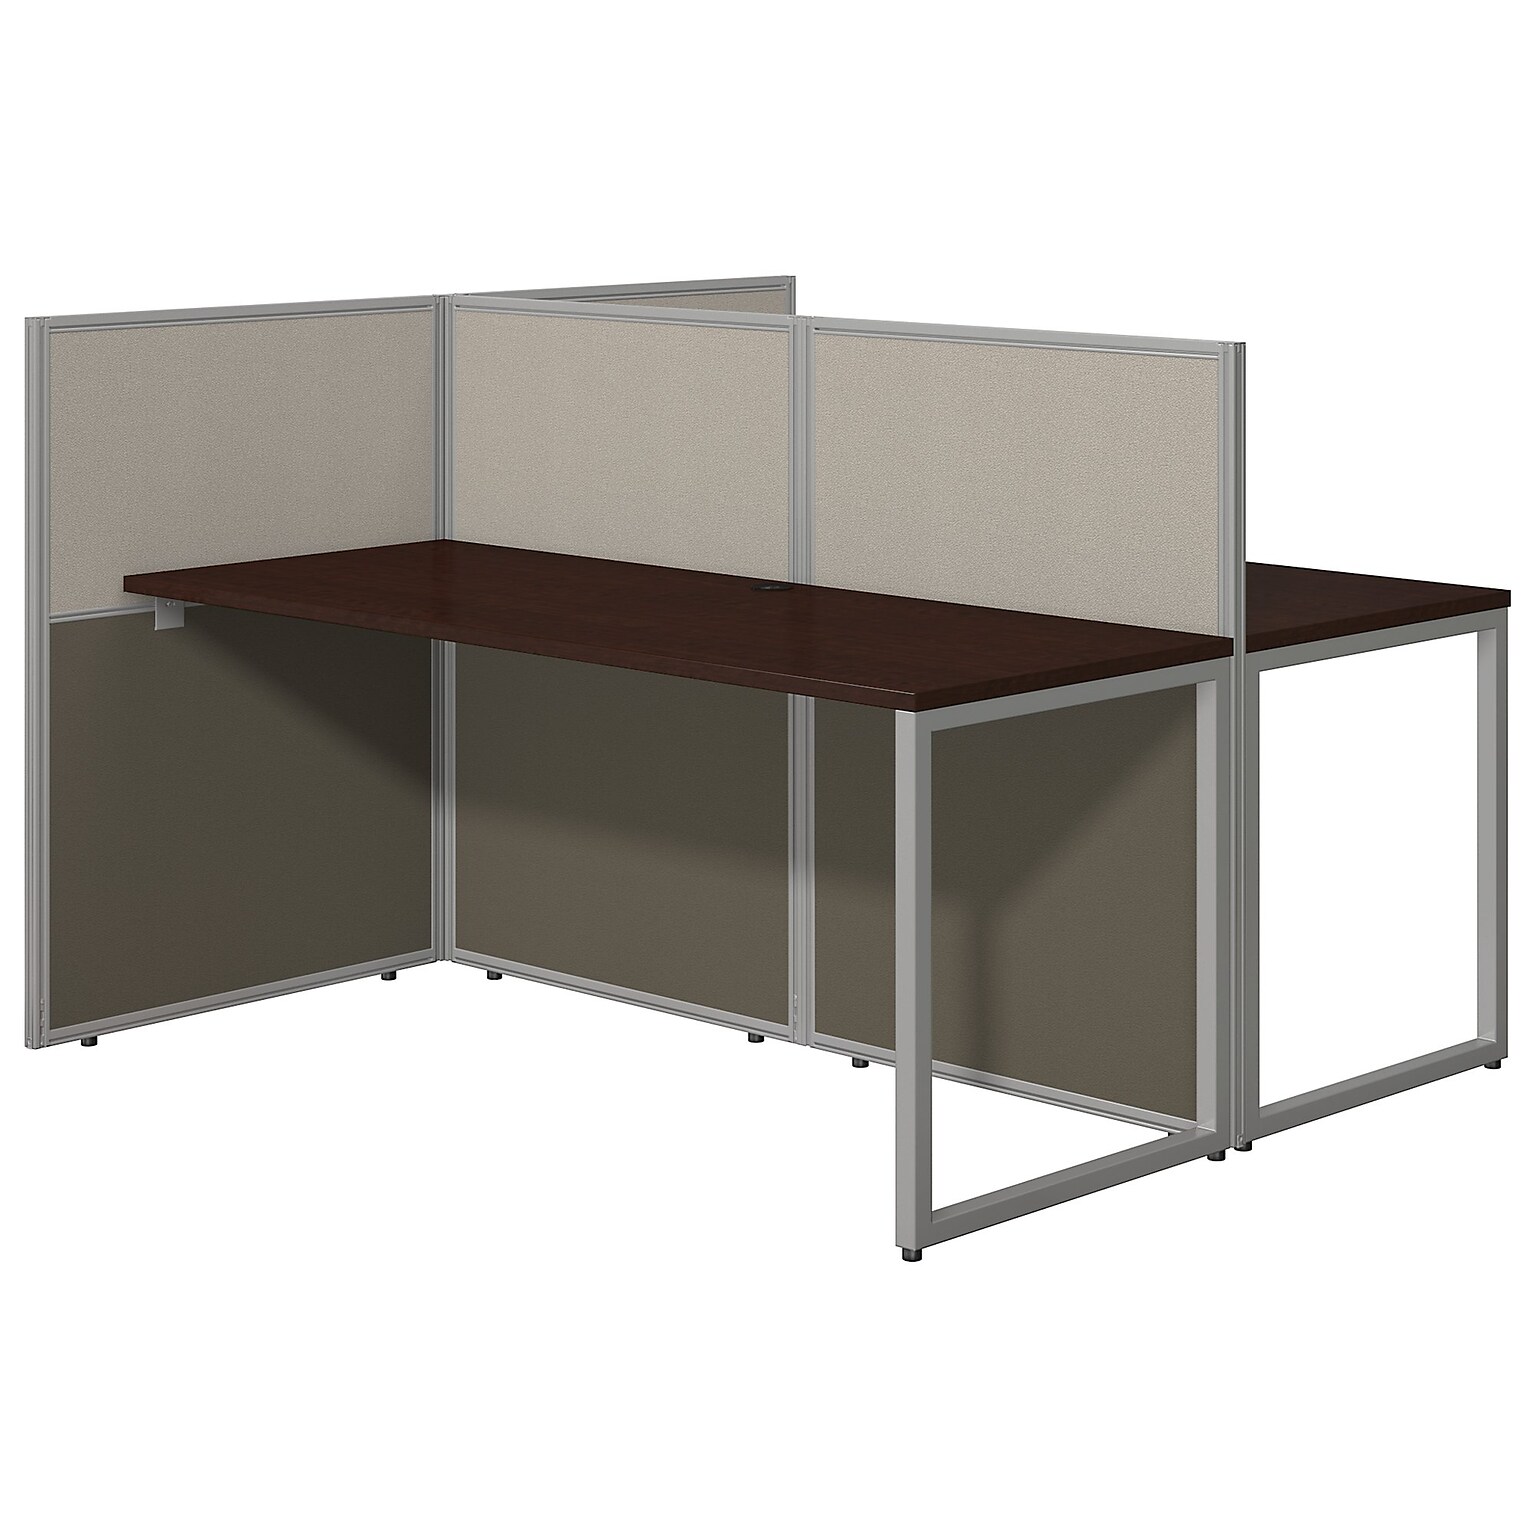 Bush Business Furniture Easy Office 60W 2 Person Back to Back Cubicle Workstation, Mocha Cherry (EOD460MR-03K)